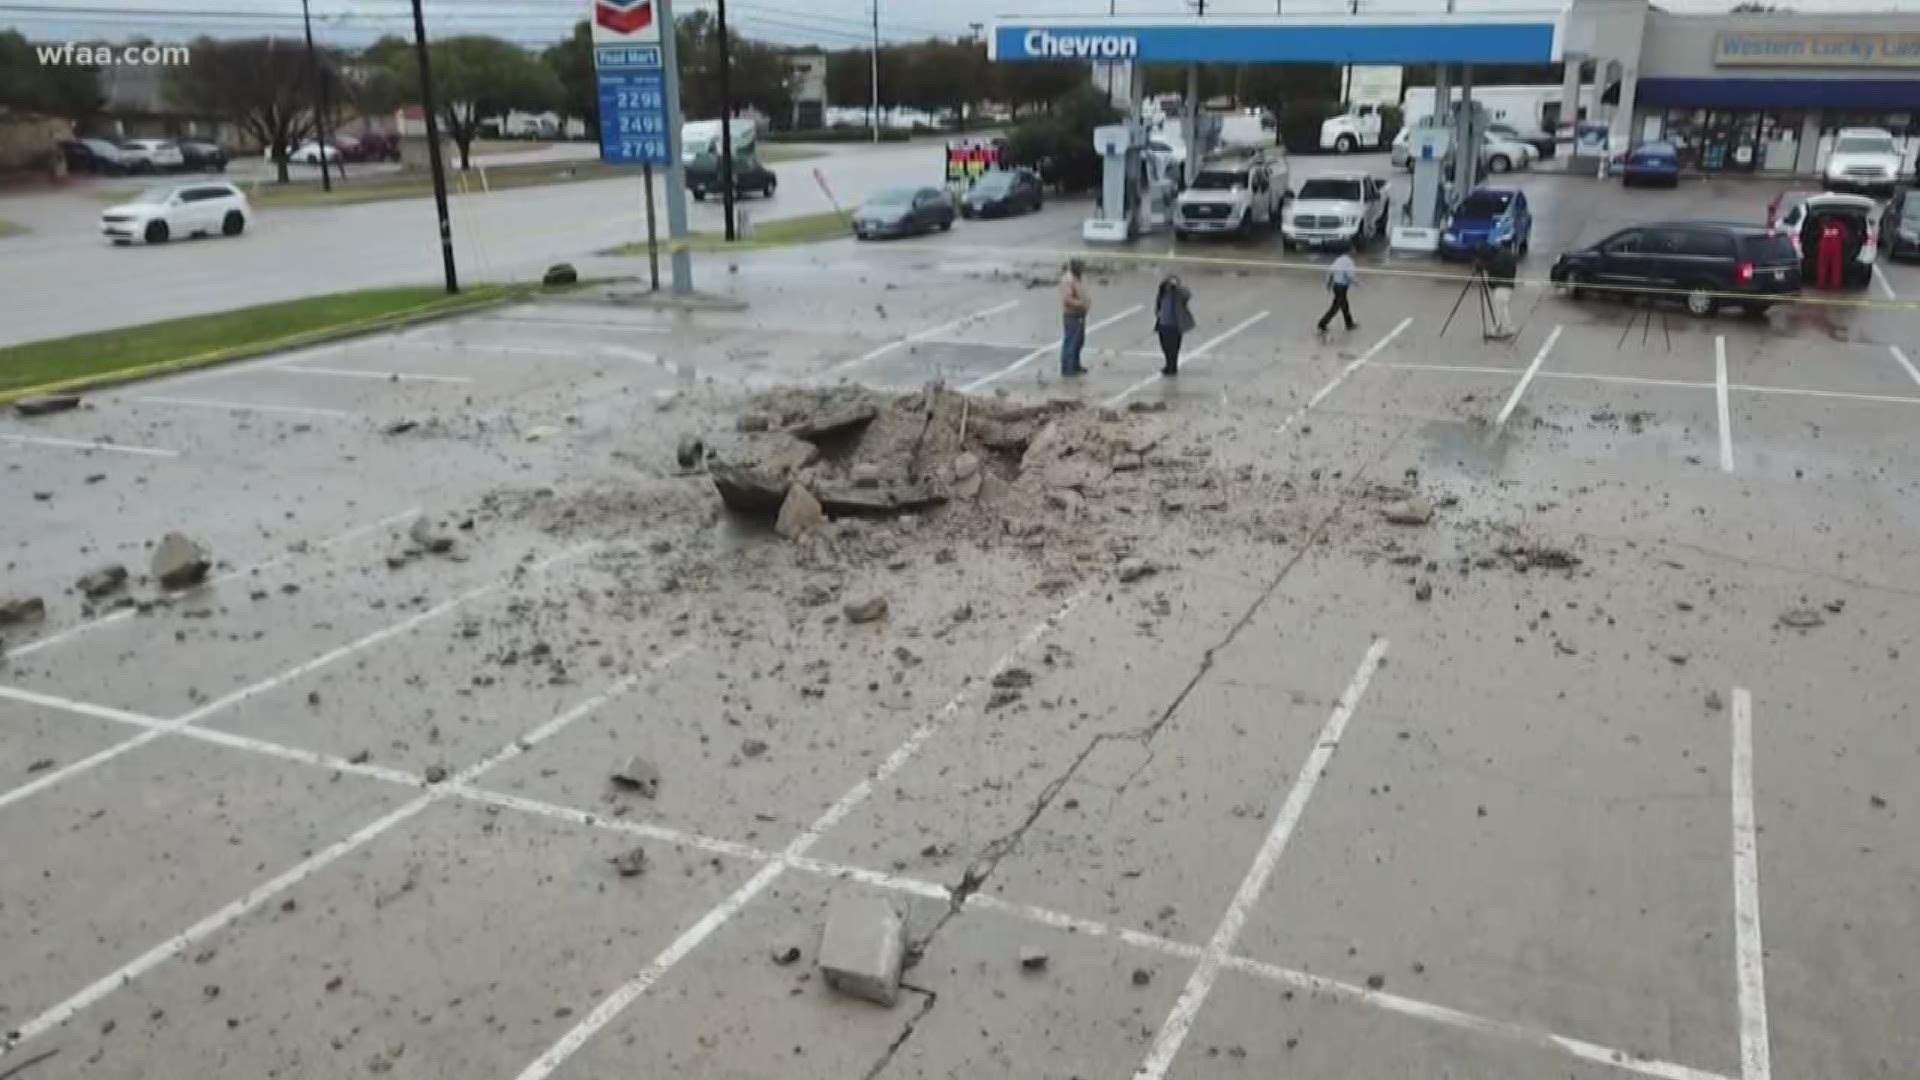 The strike caused a huge noise and sent debris at least 50 feet away from where it hit the ground near a Chevron gas station.